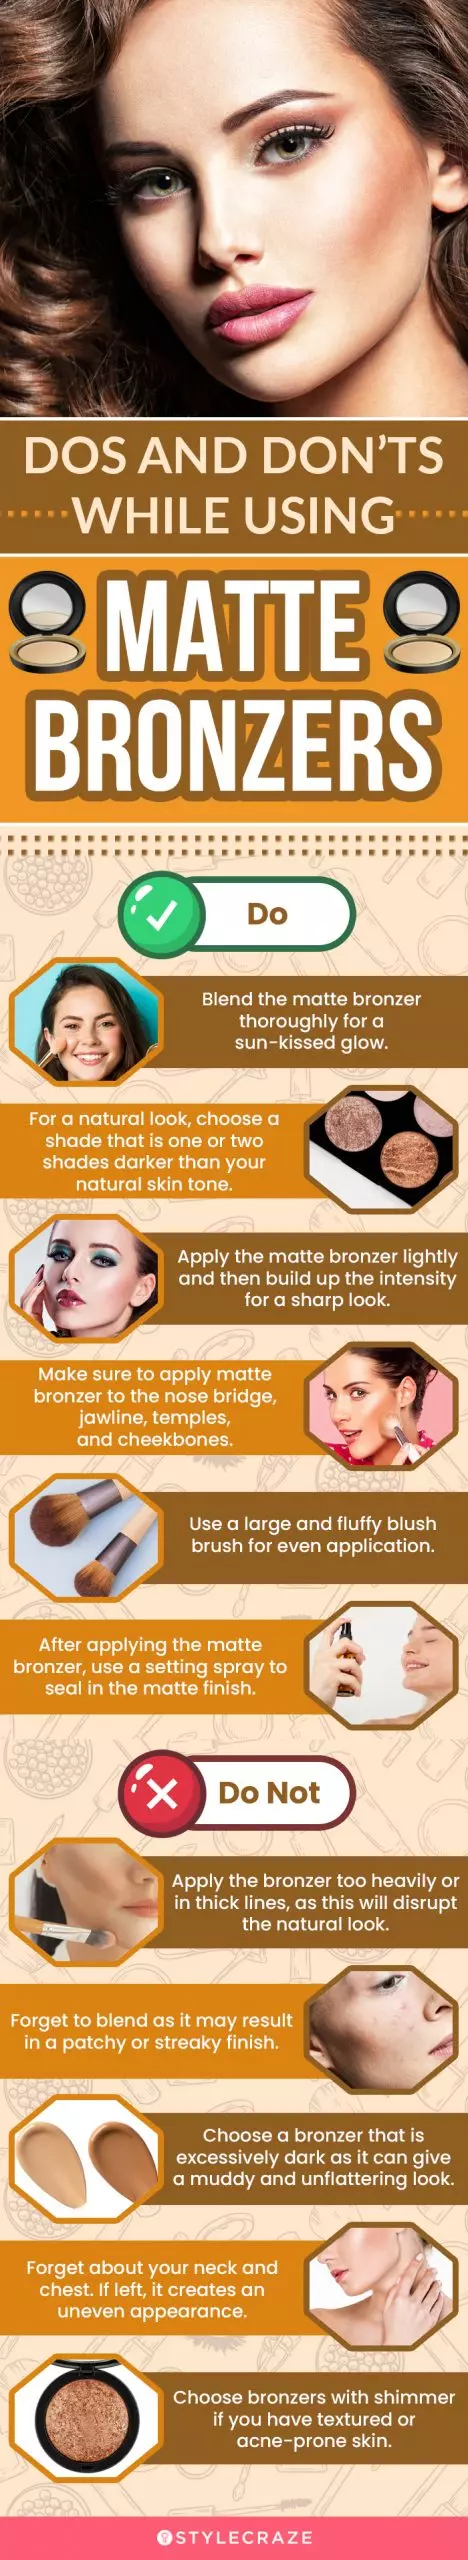 Do's And Don’ts While Using Matte Bronzers (infographic)